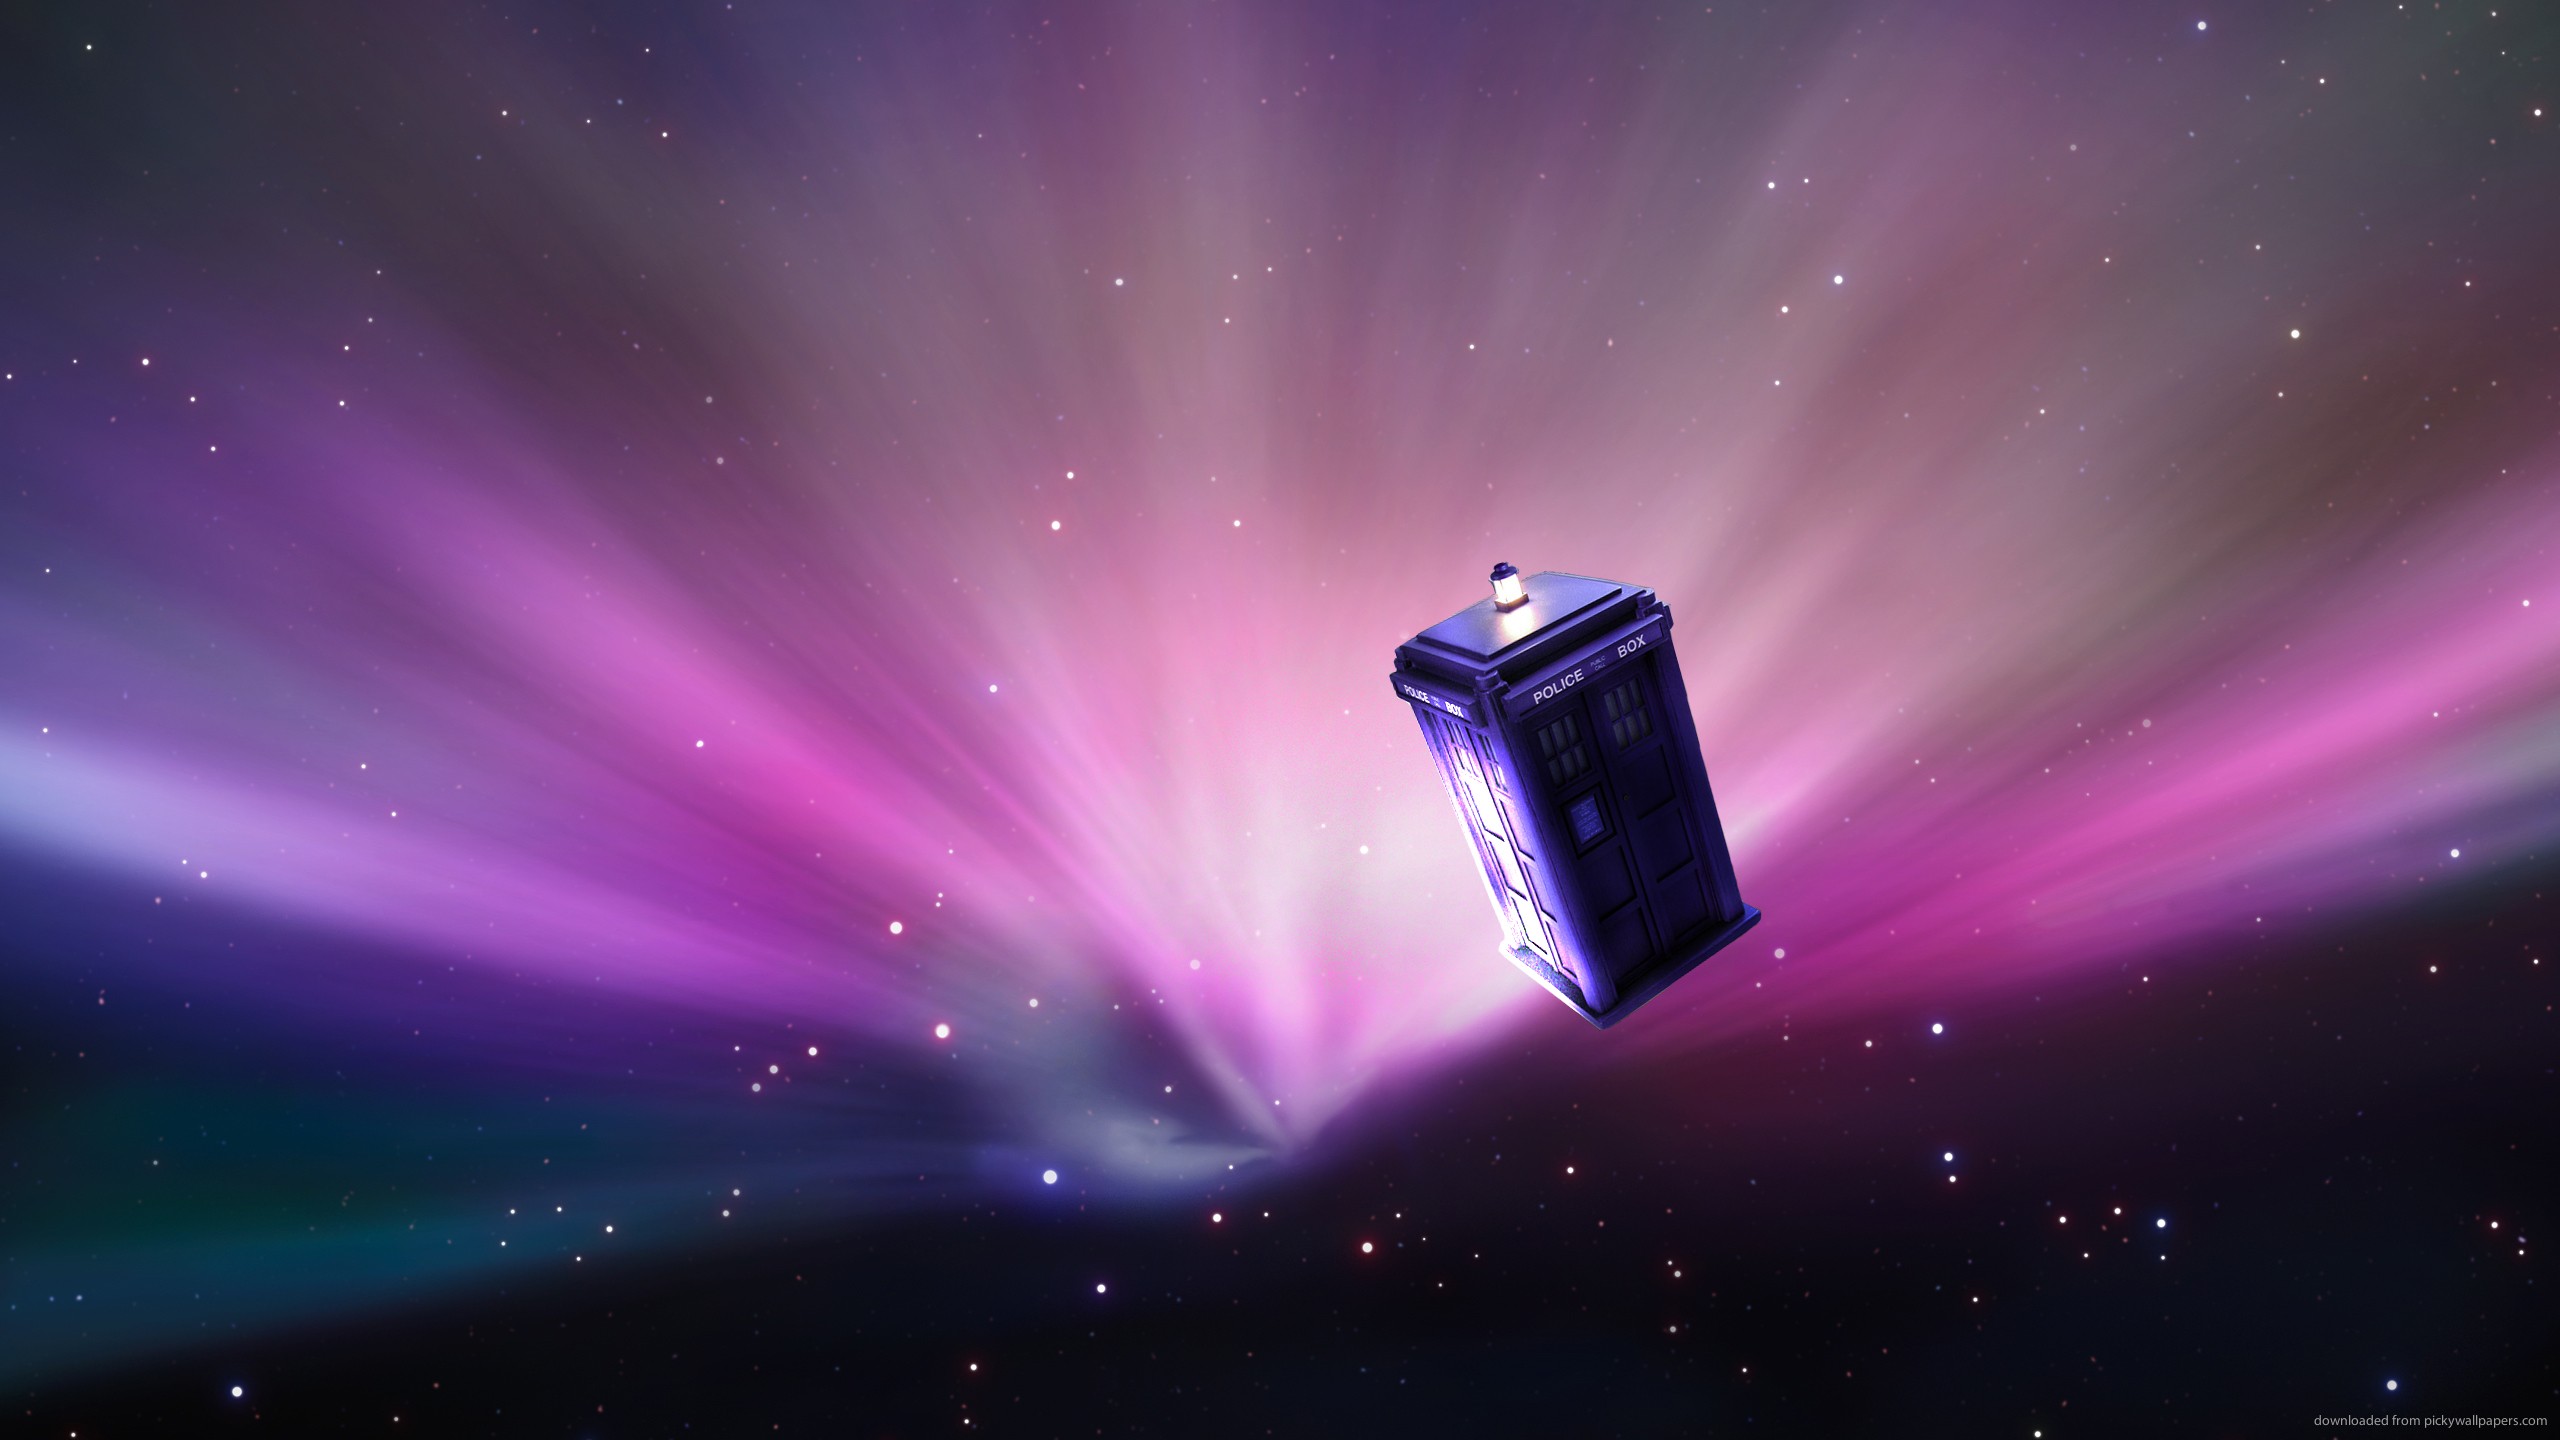 General 2560x1440 Doctor Who TARDIS spaceship TV series science fiction